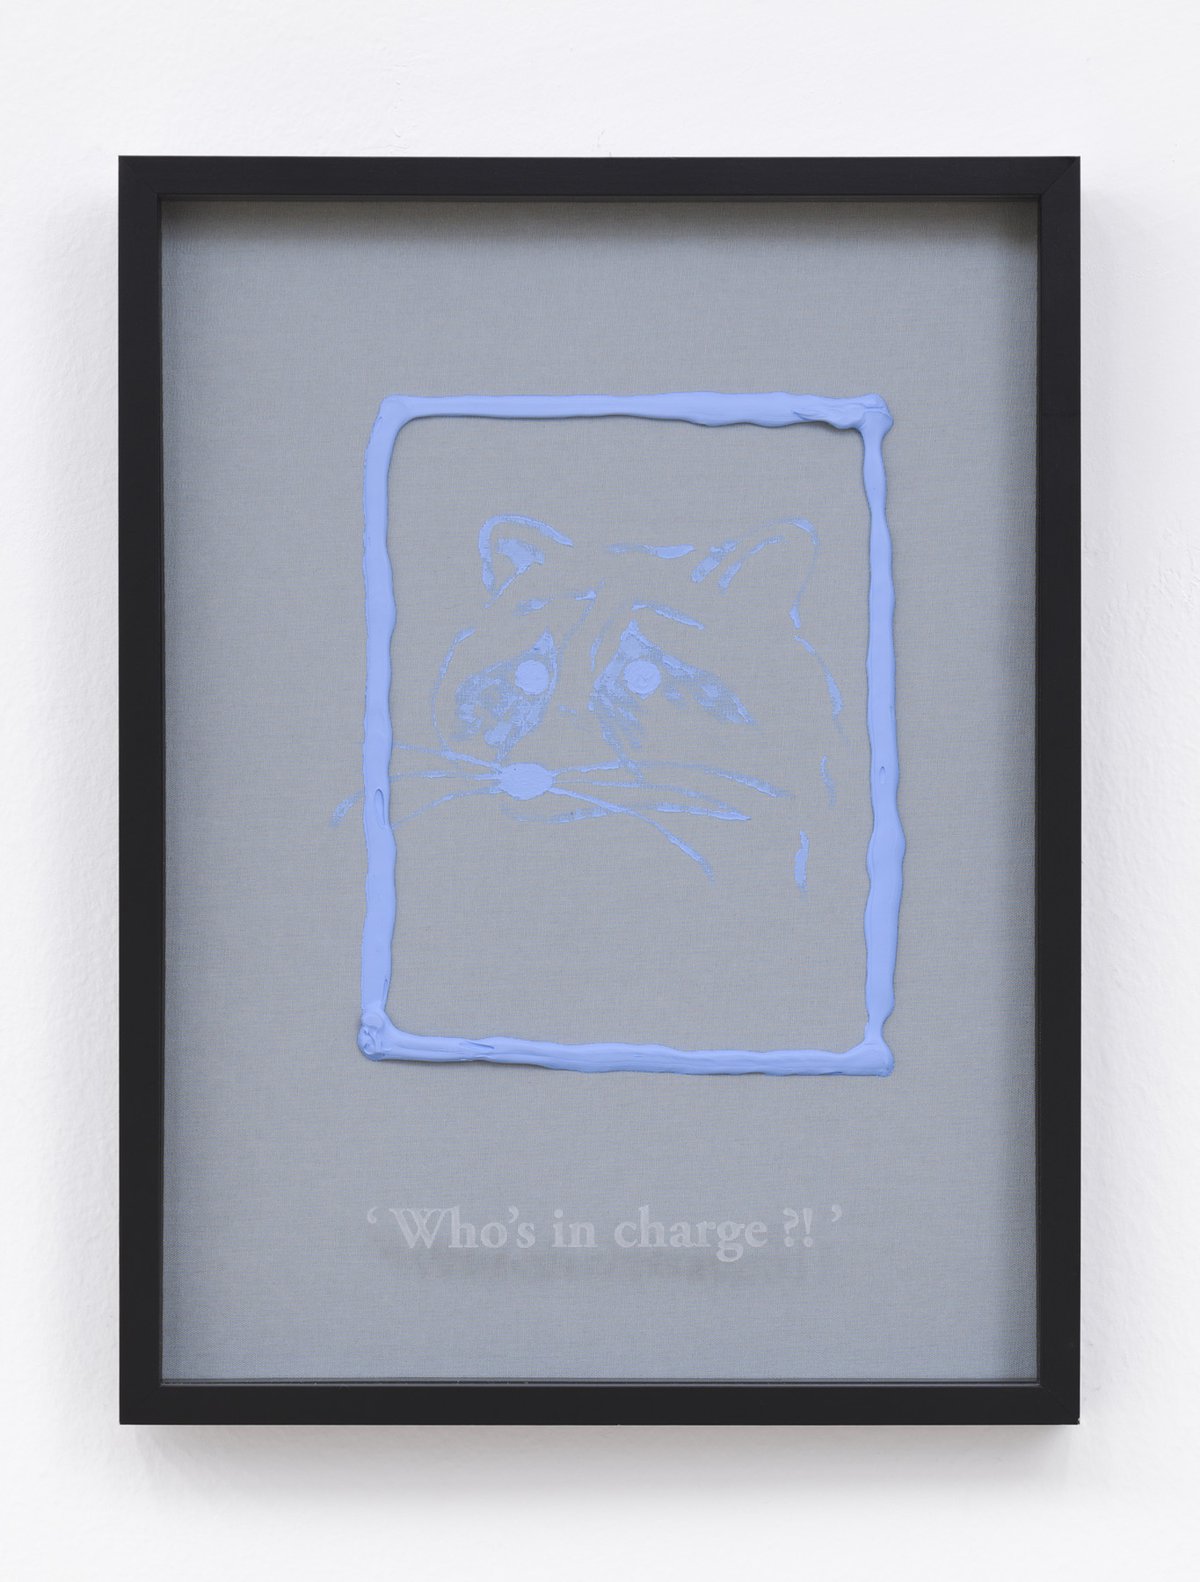 Philipp Timischl&quot;Who&#x27;s in charge?!&quot; (Light Grey/Royal Blue Light), 2017Acrylic on linen and glass-engraved object frame40.1 x 32.1 cm